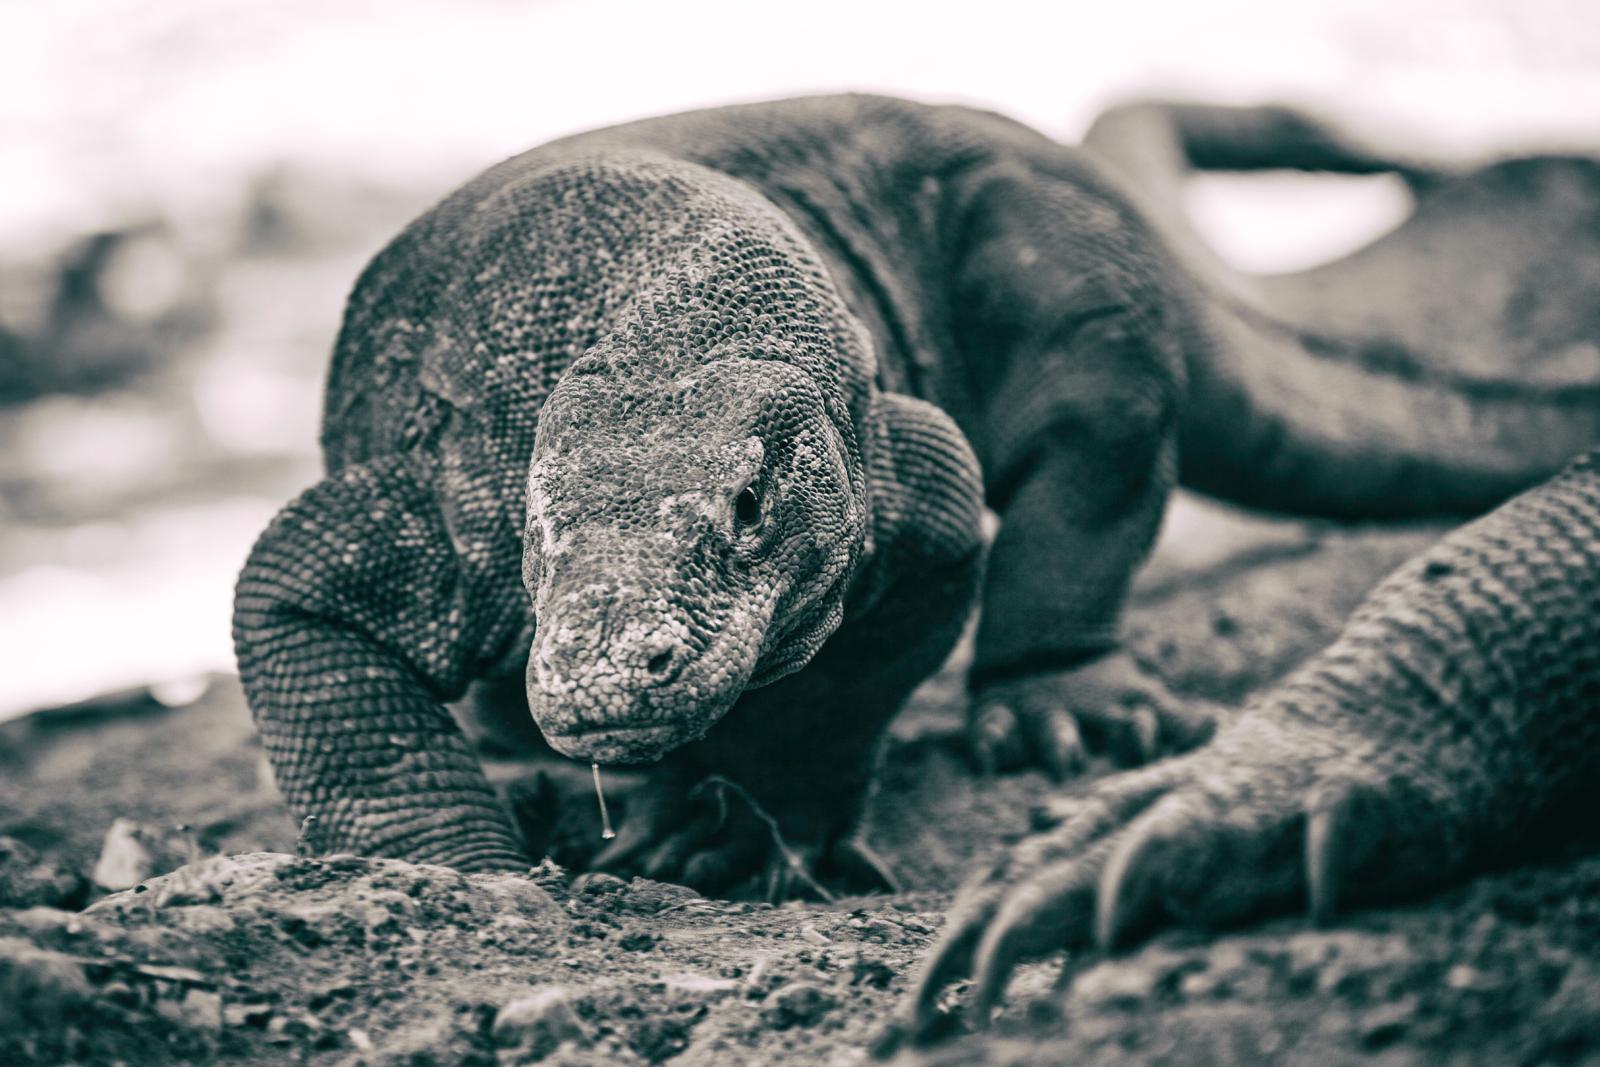 The Komodo Dragon is the bigges...3,000 dragons left in the wild.